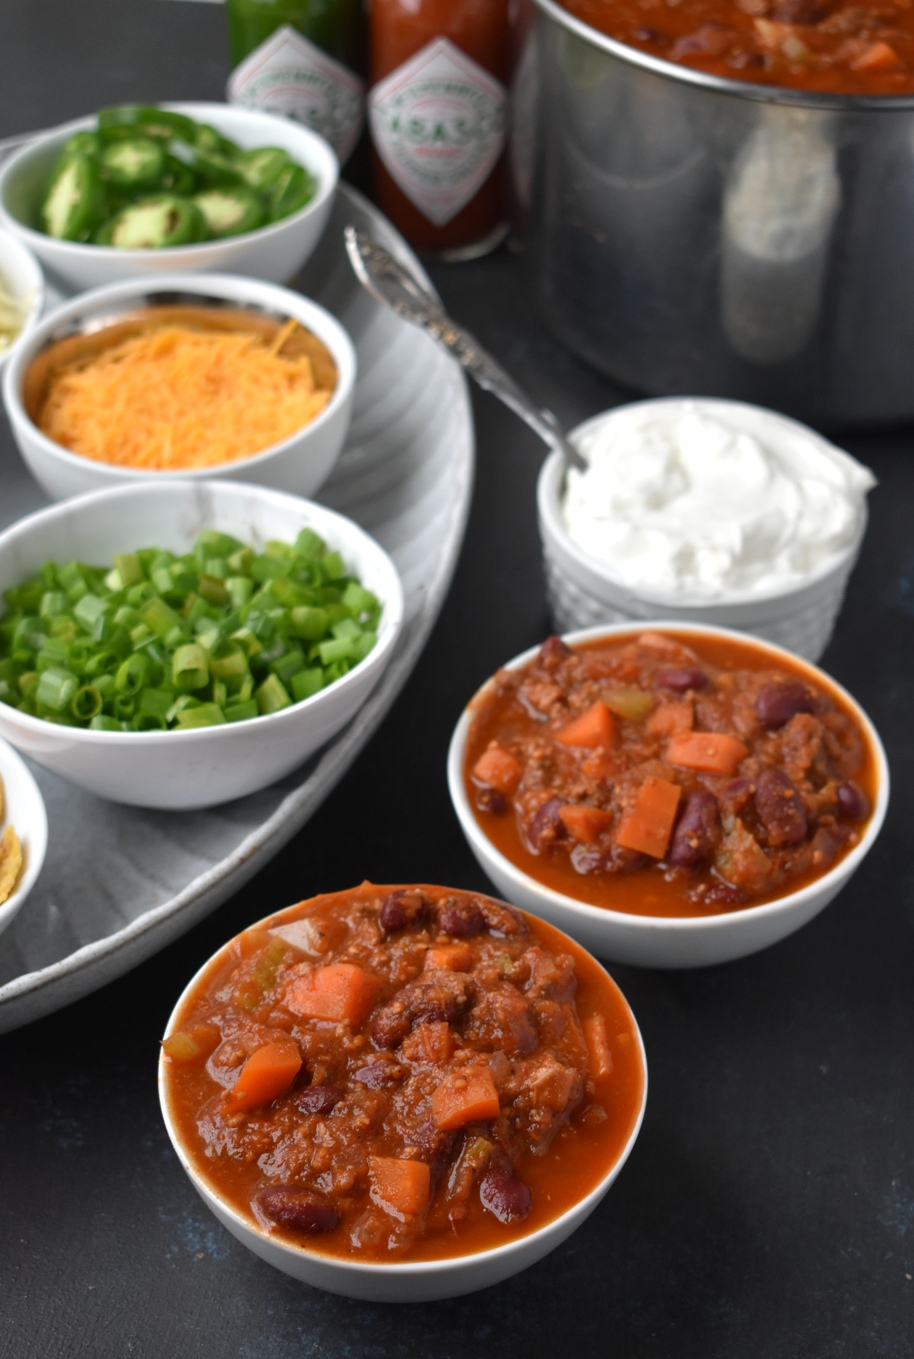 The Ultimate Chili Bar | The Nutritionist Reviews